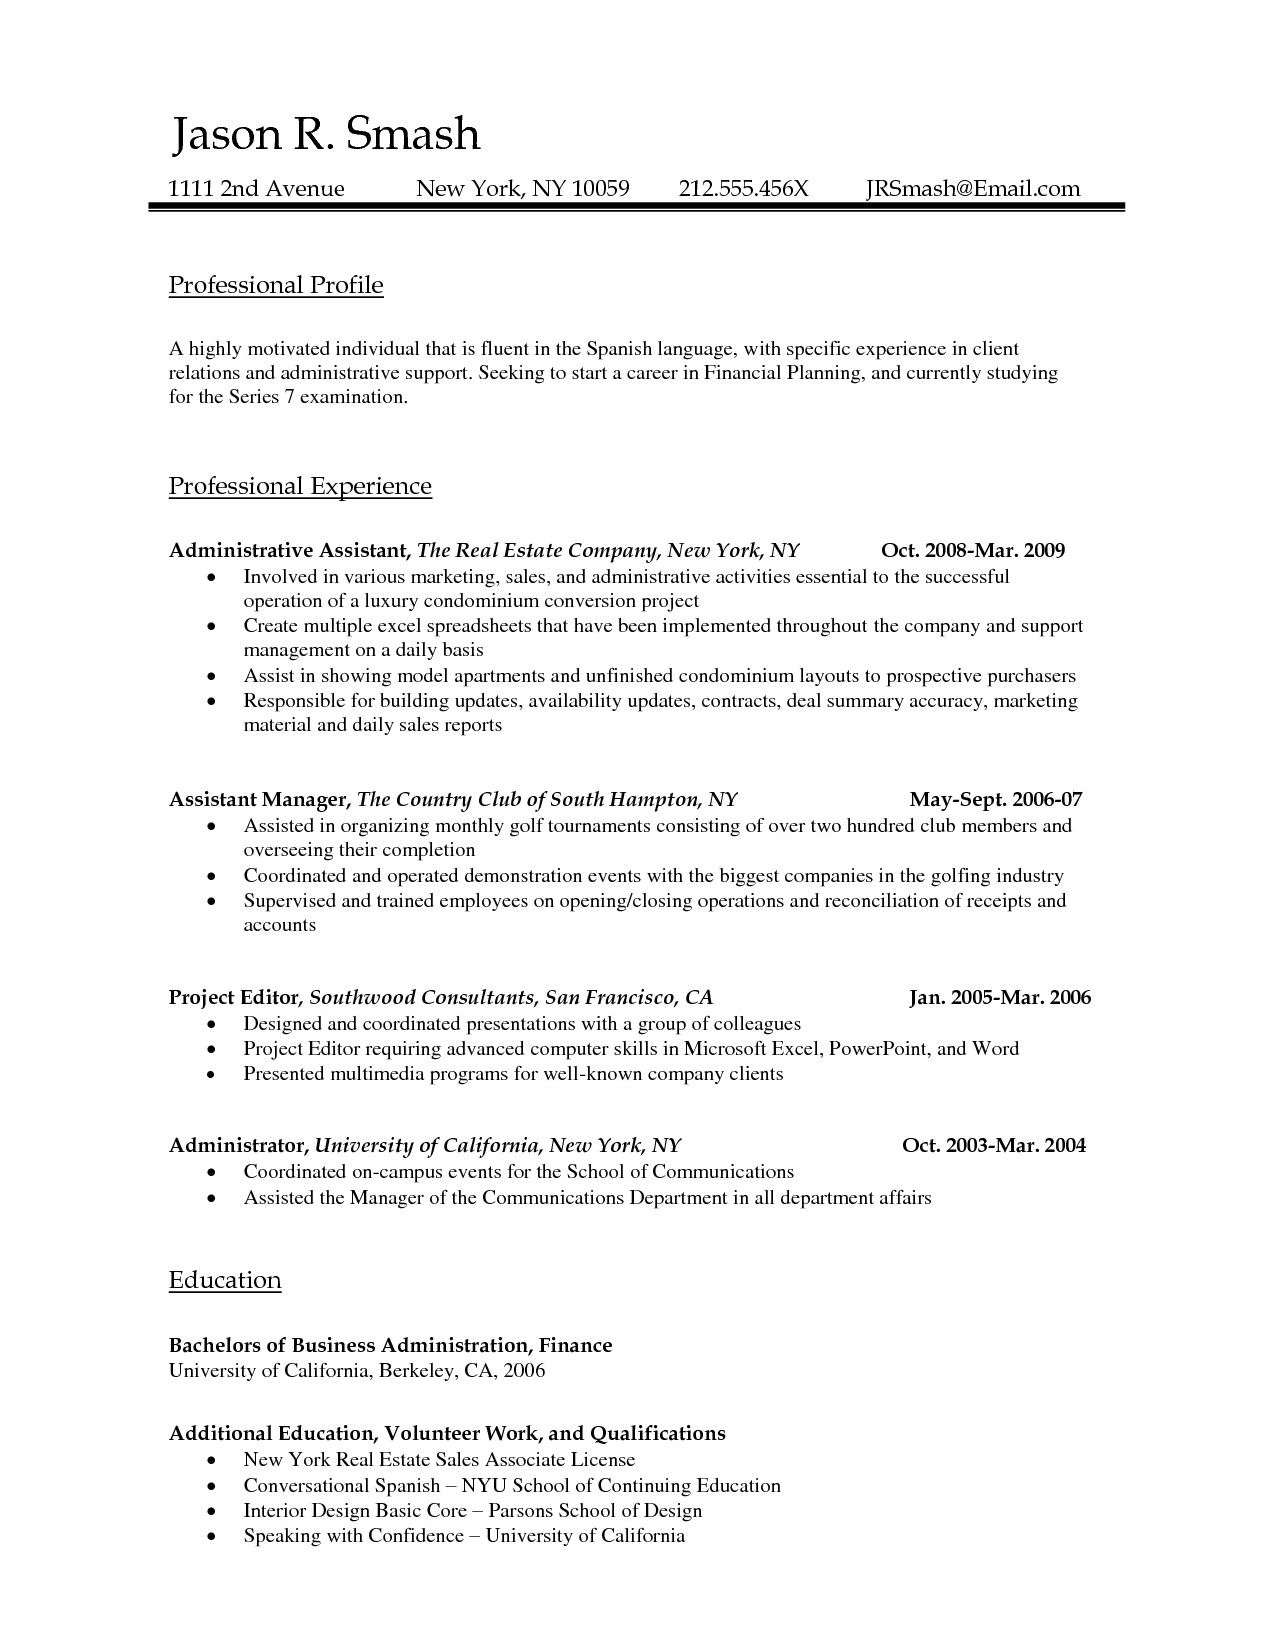 resume templates for microsoft word 2010 how to create a publisher tri fold brochure free template forms fill inside 2010